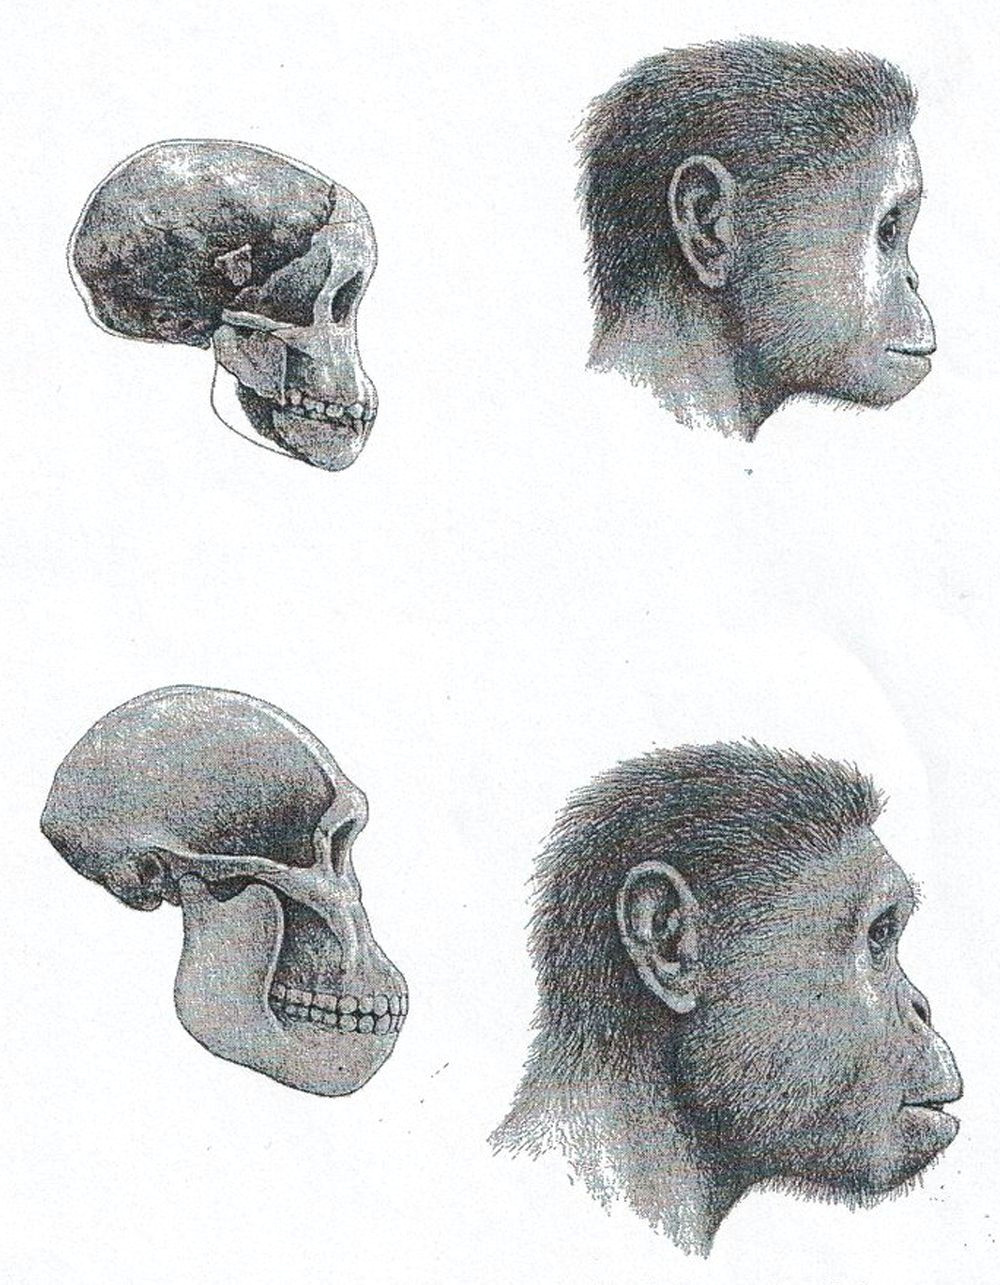 australopithecus africanus comparison taung child top and sts 5 bottom reconstructions by mauricio anton